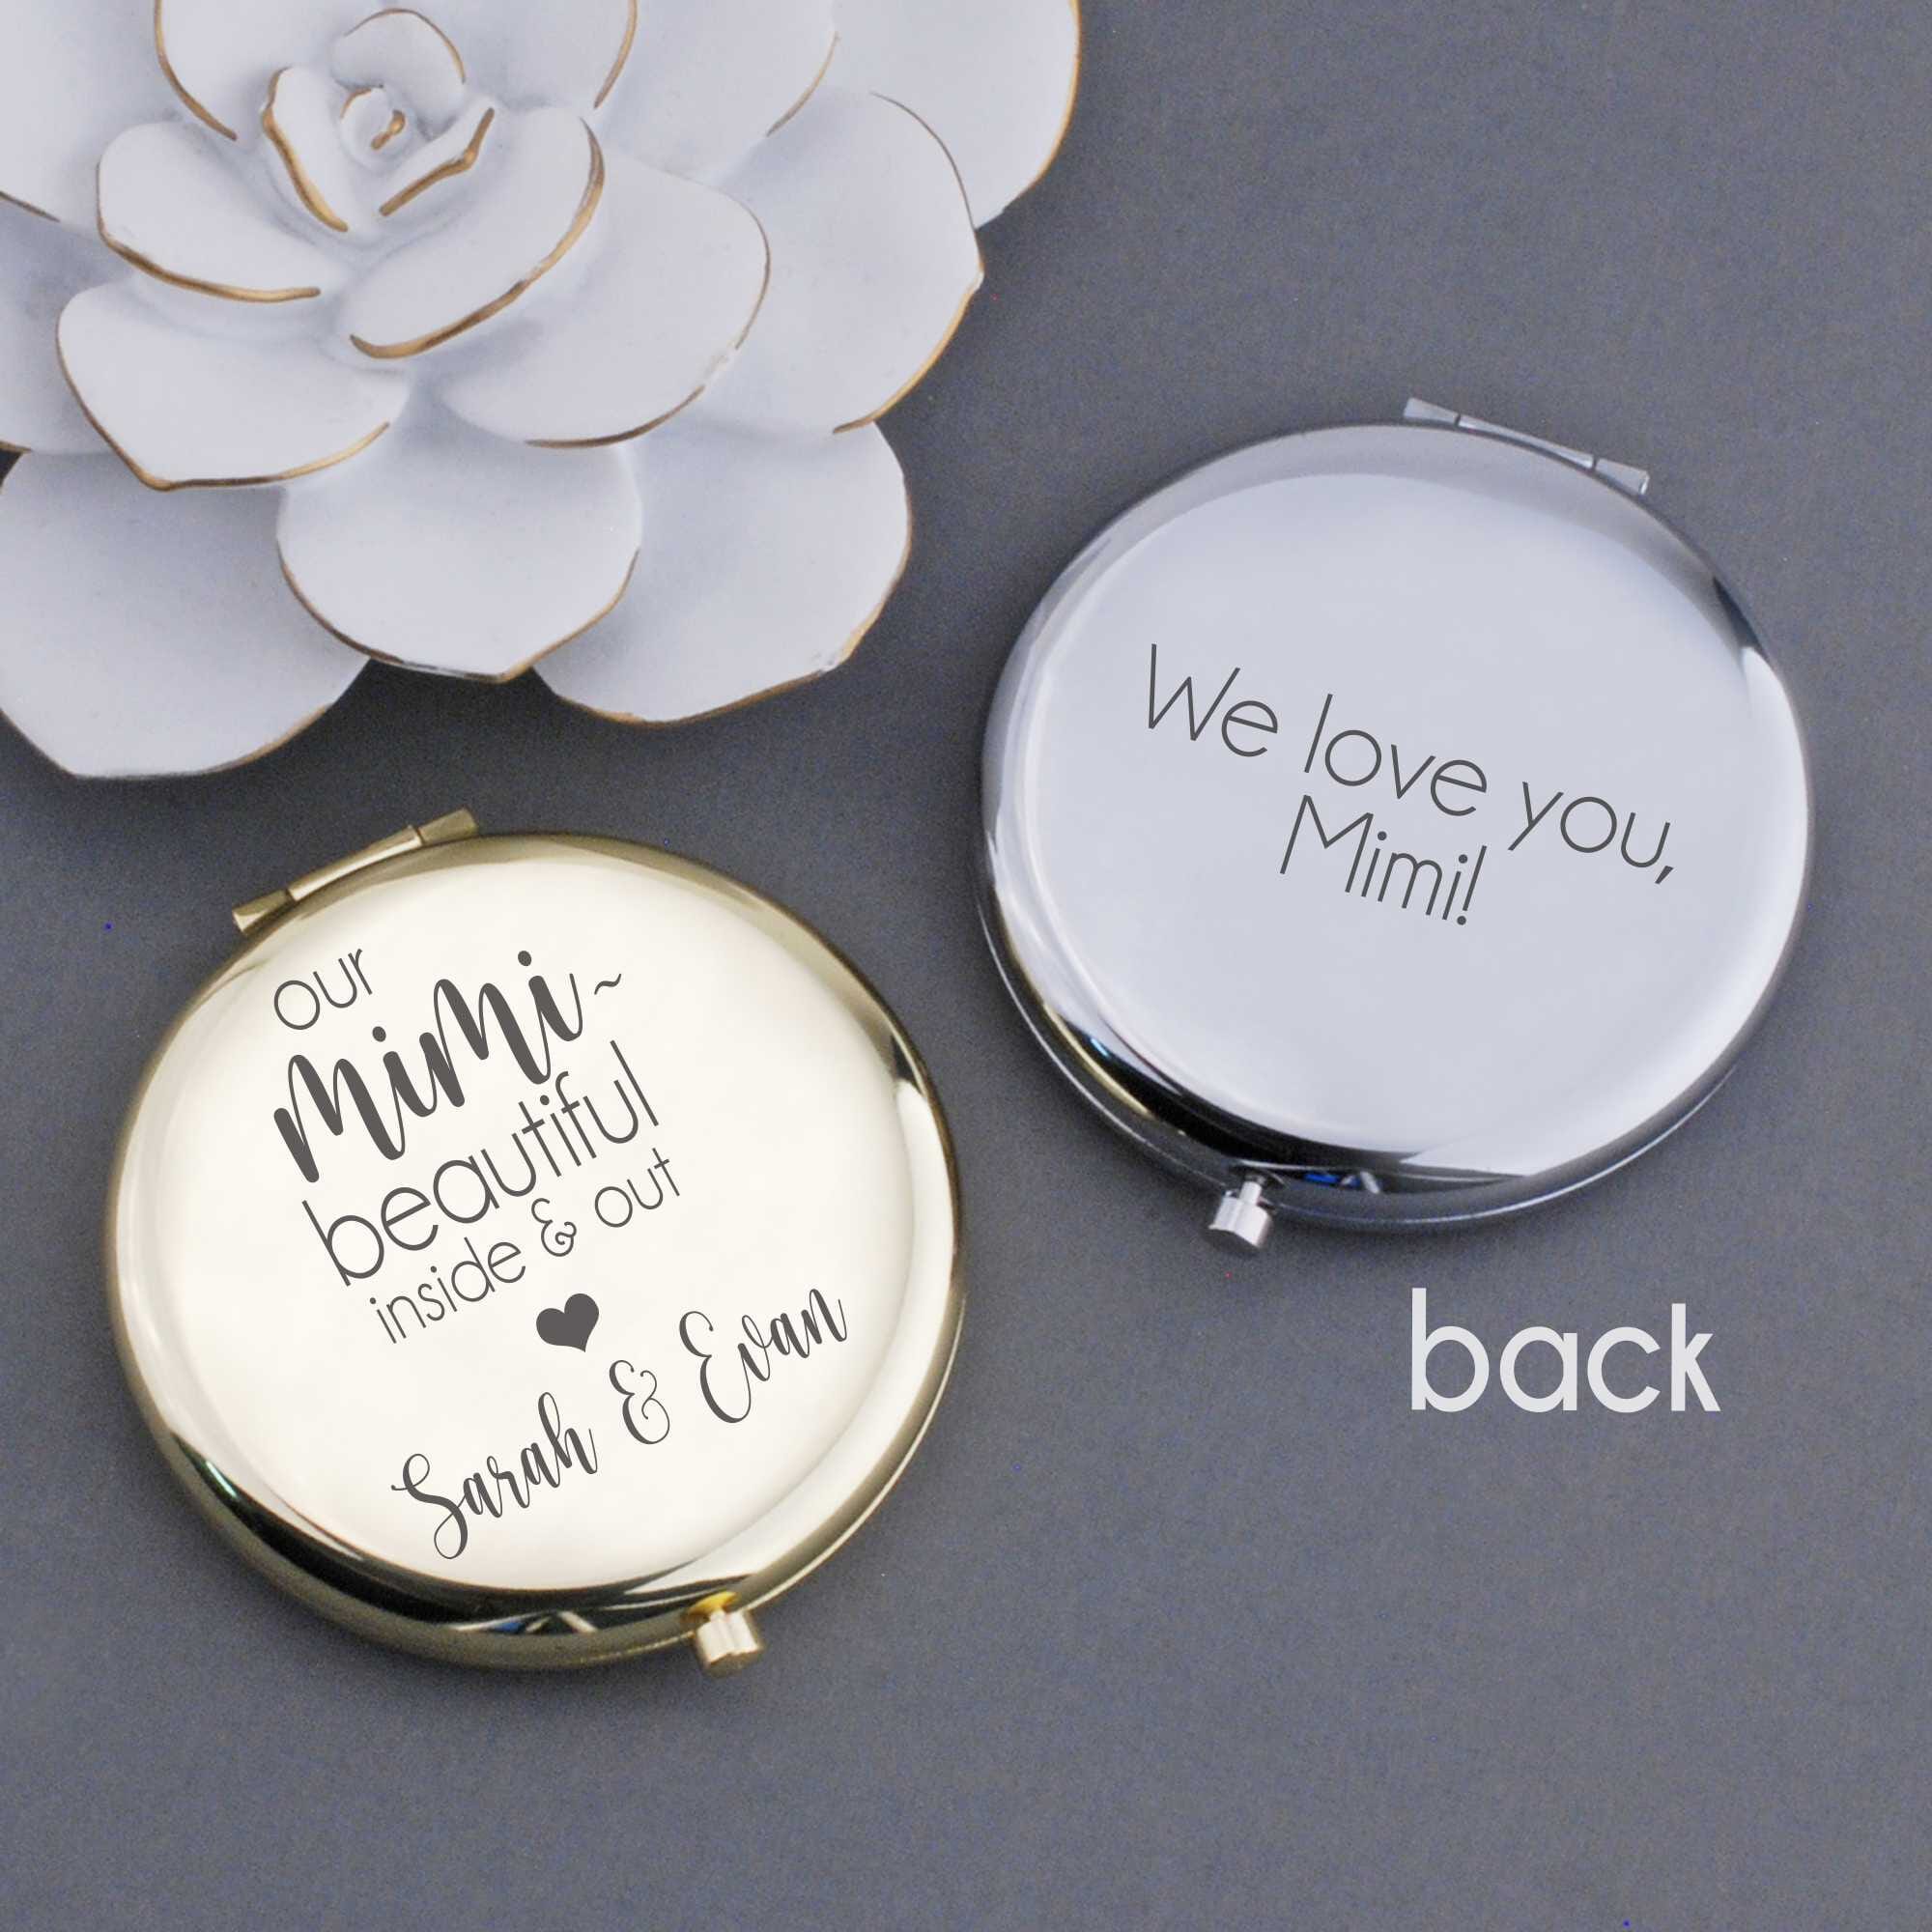 Beautiful inside out pocket mirror front